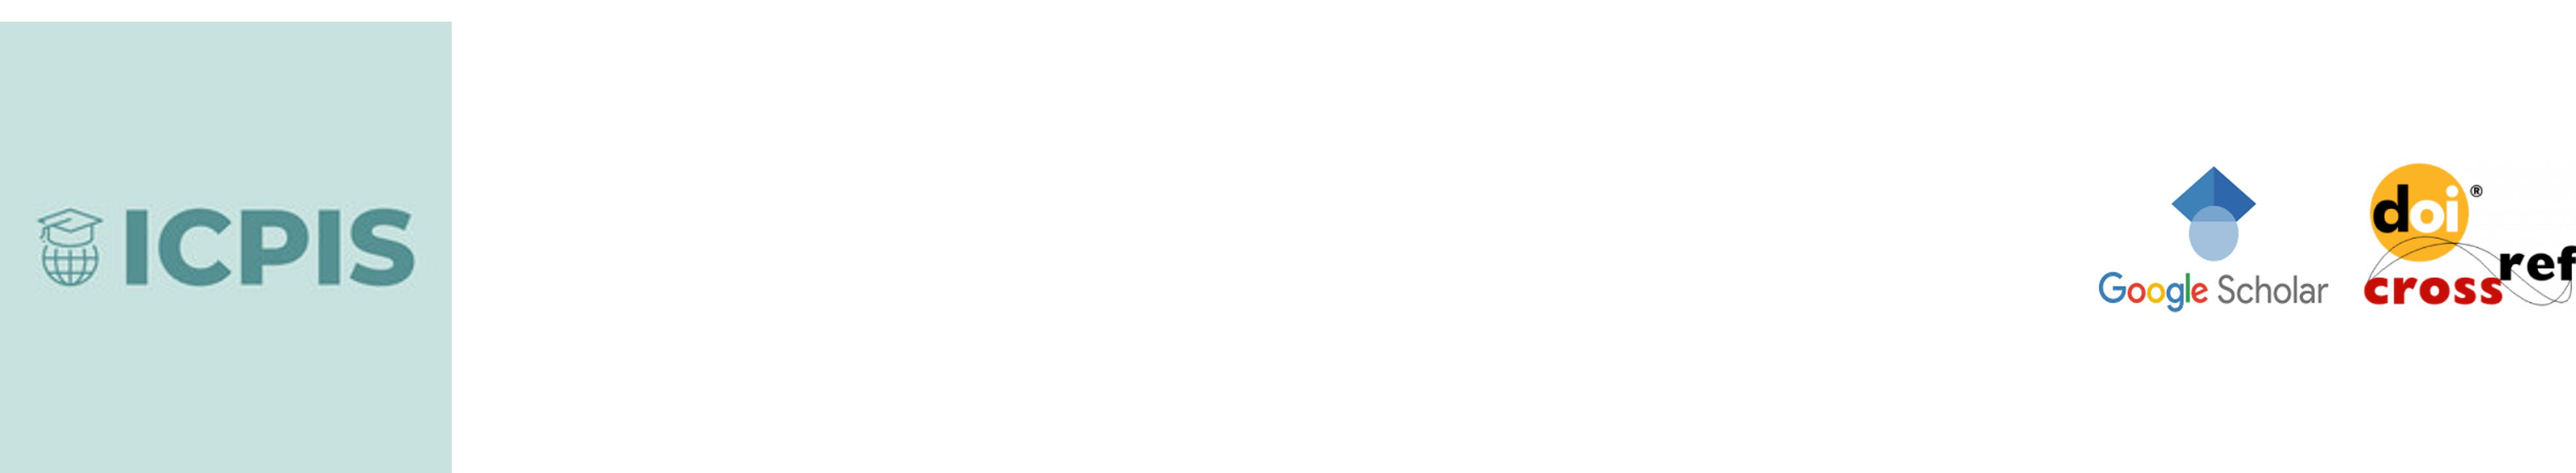 1st International Conference on Pioneer and Innovative Studies